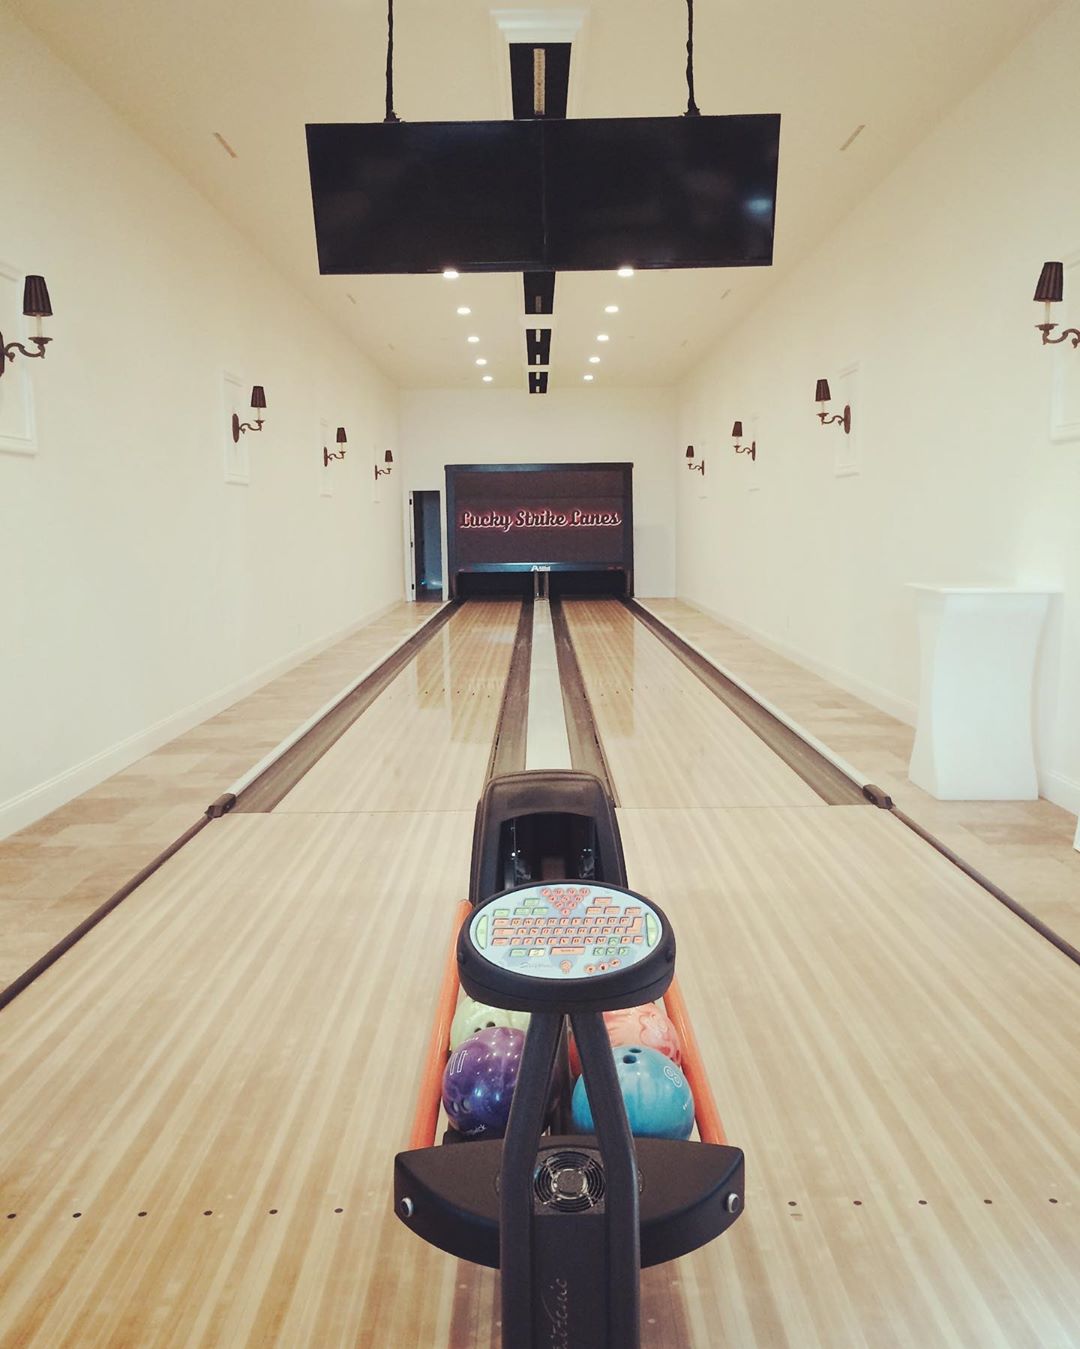 Home Bowling Alley with Two Lanes. Photo by Instagram user @charcodb